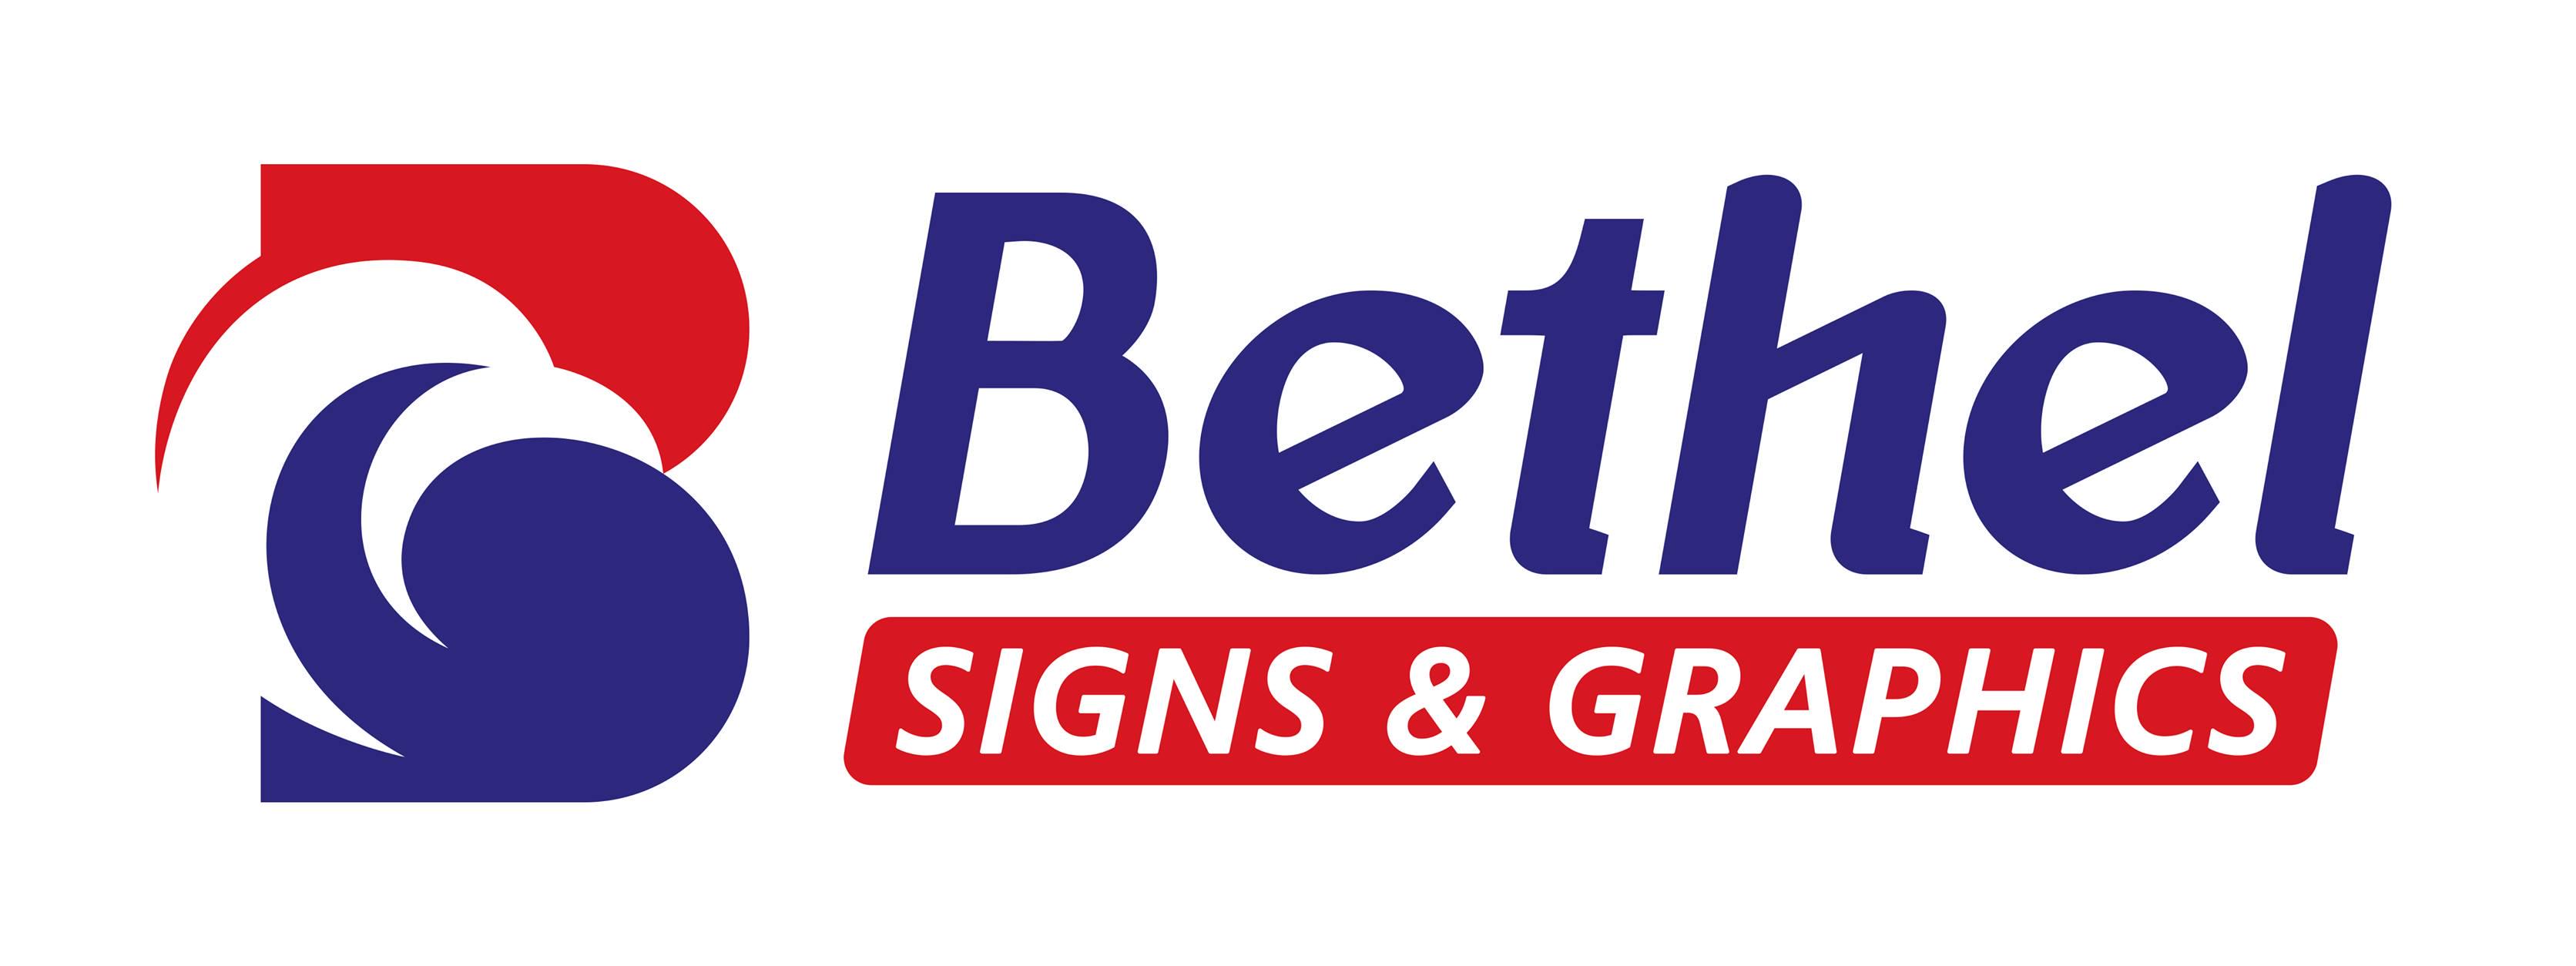 Bethel Signs & Graphics profile on Qualified.One